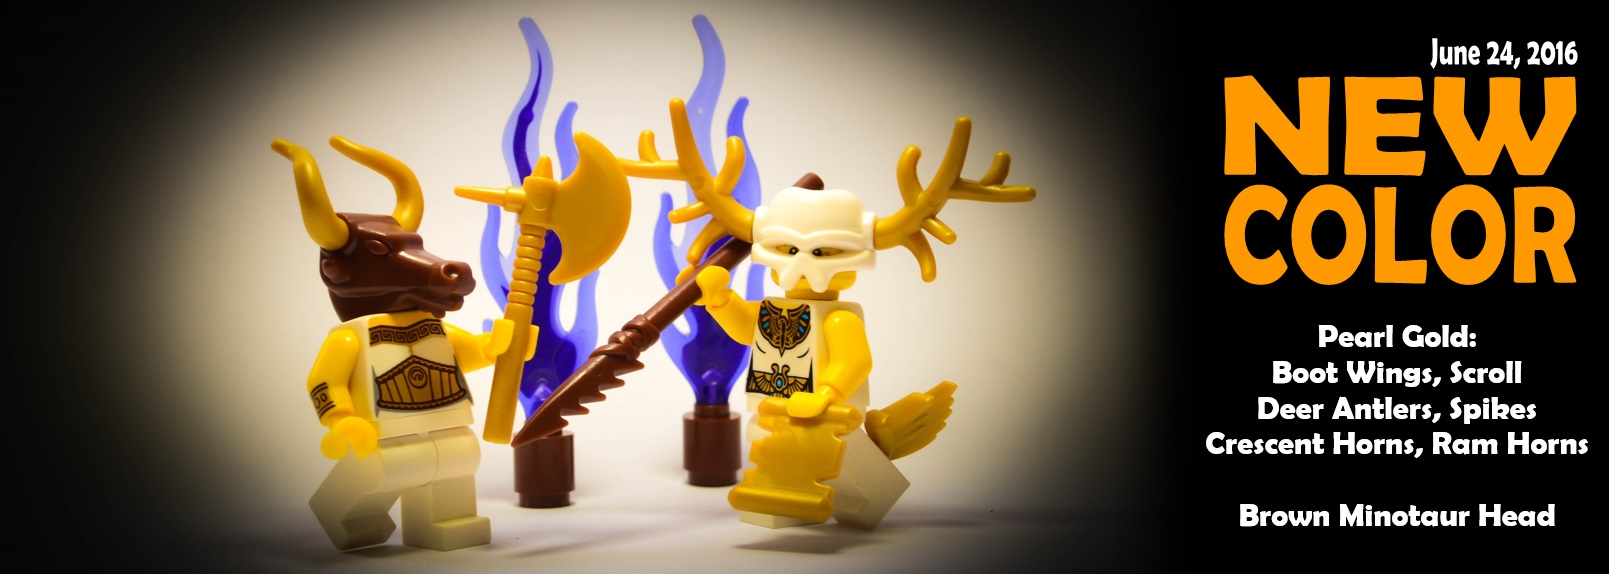 gold lego horns and wings